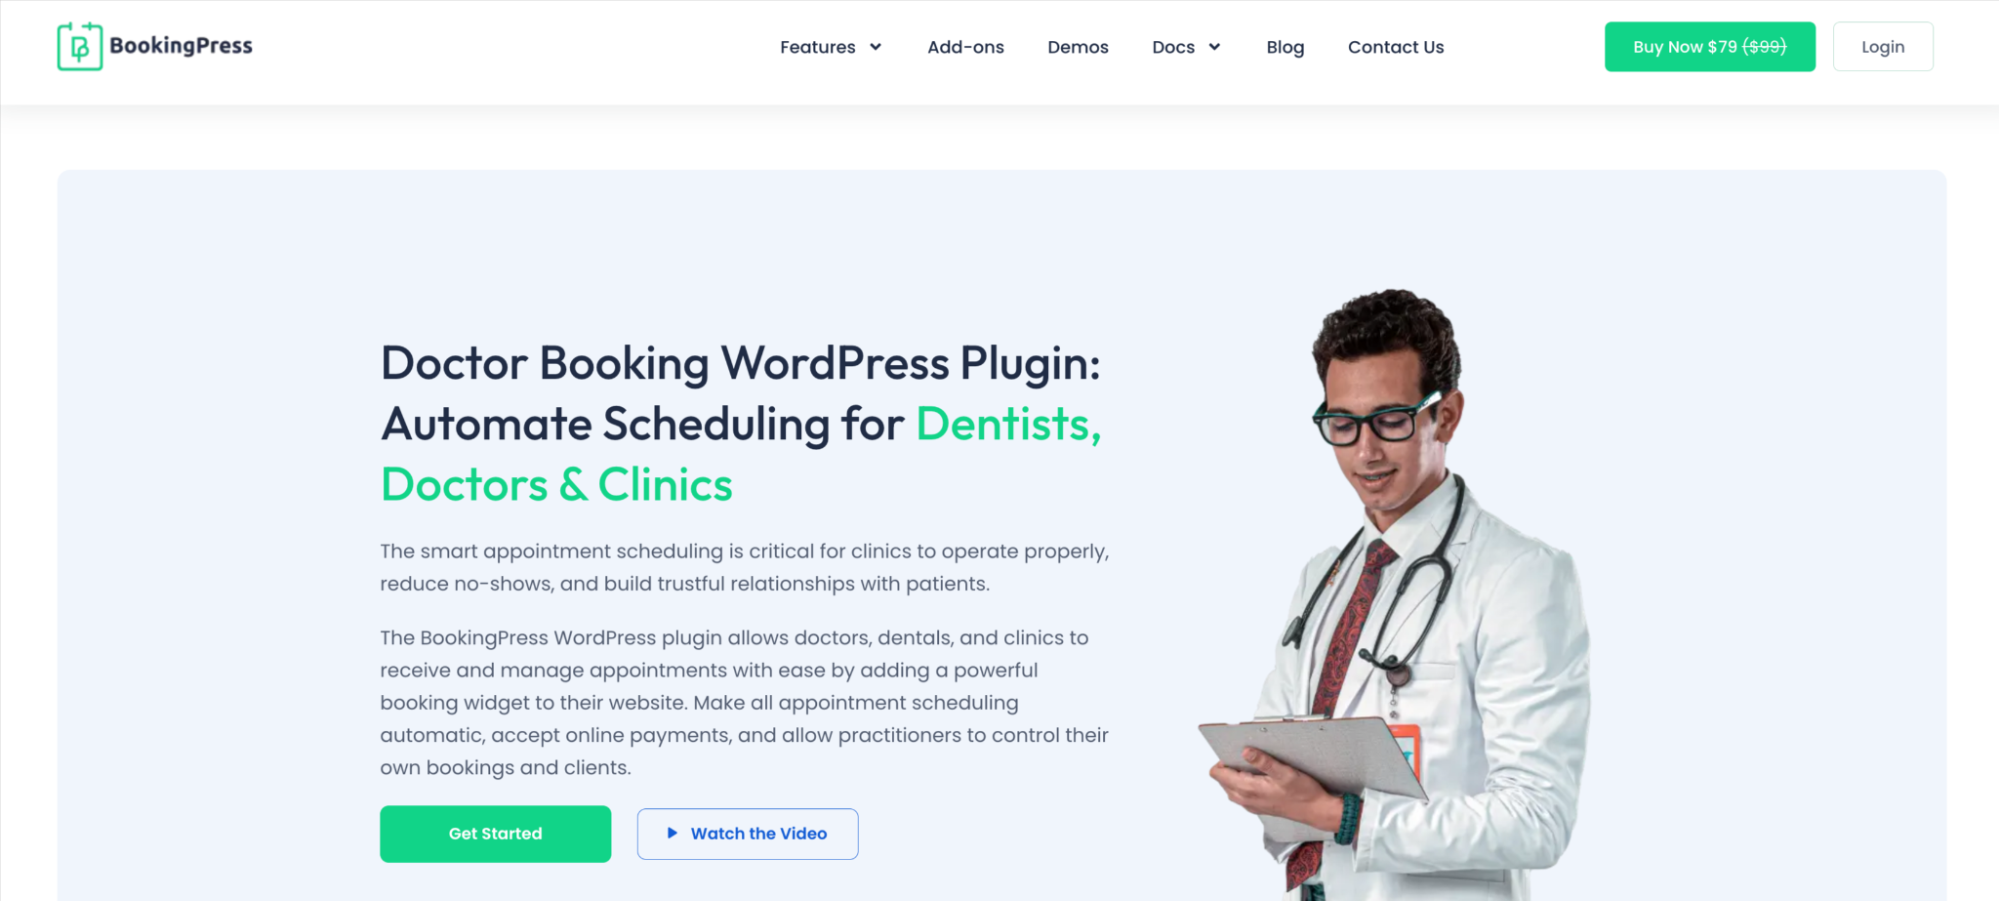 BookingPress for doctors